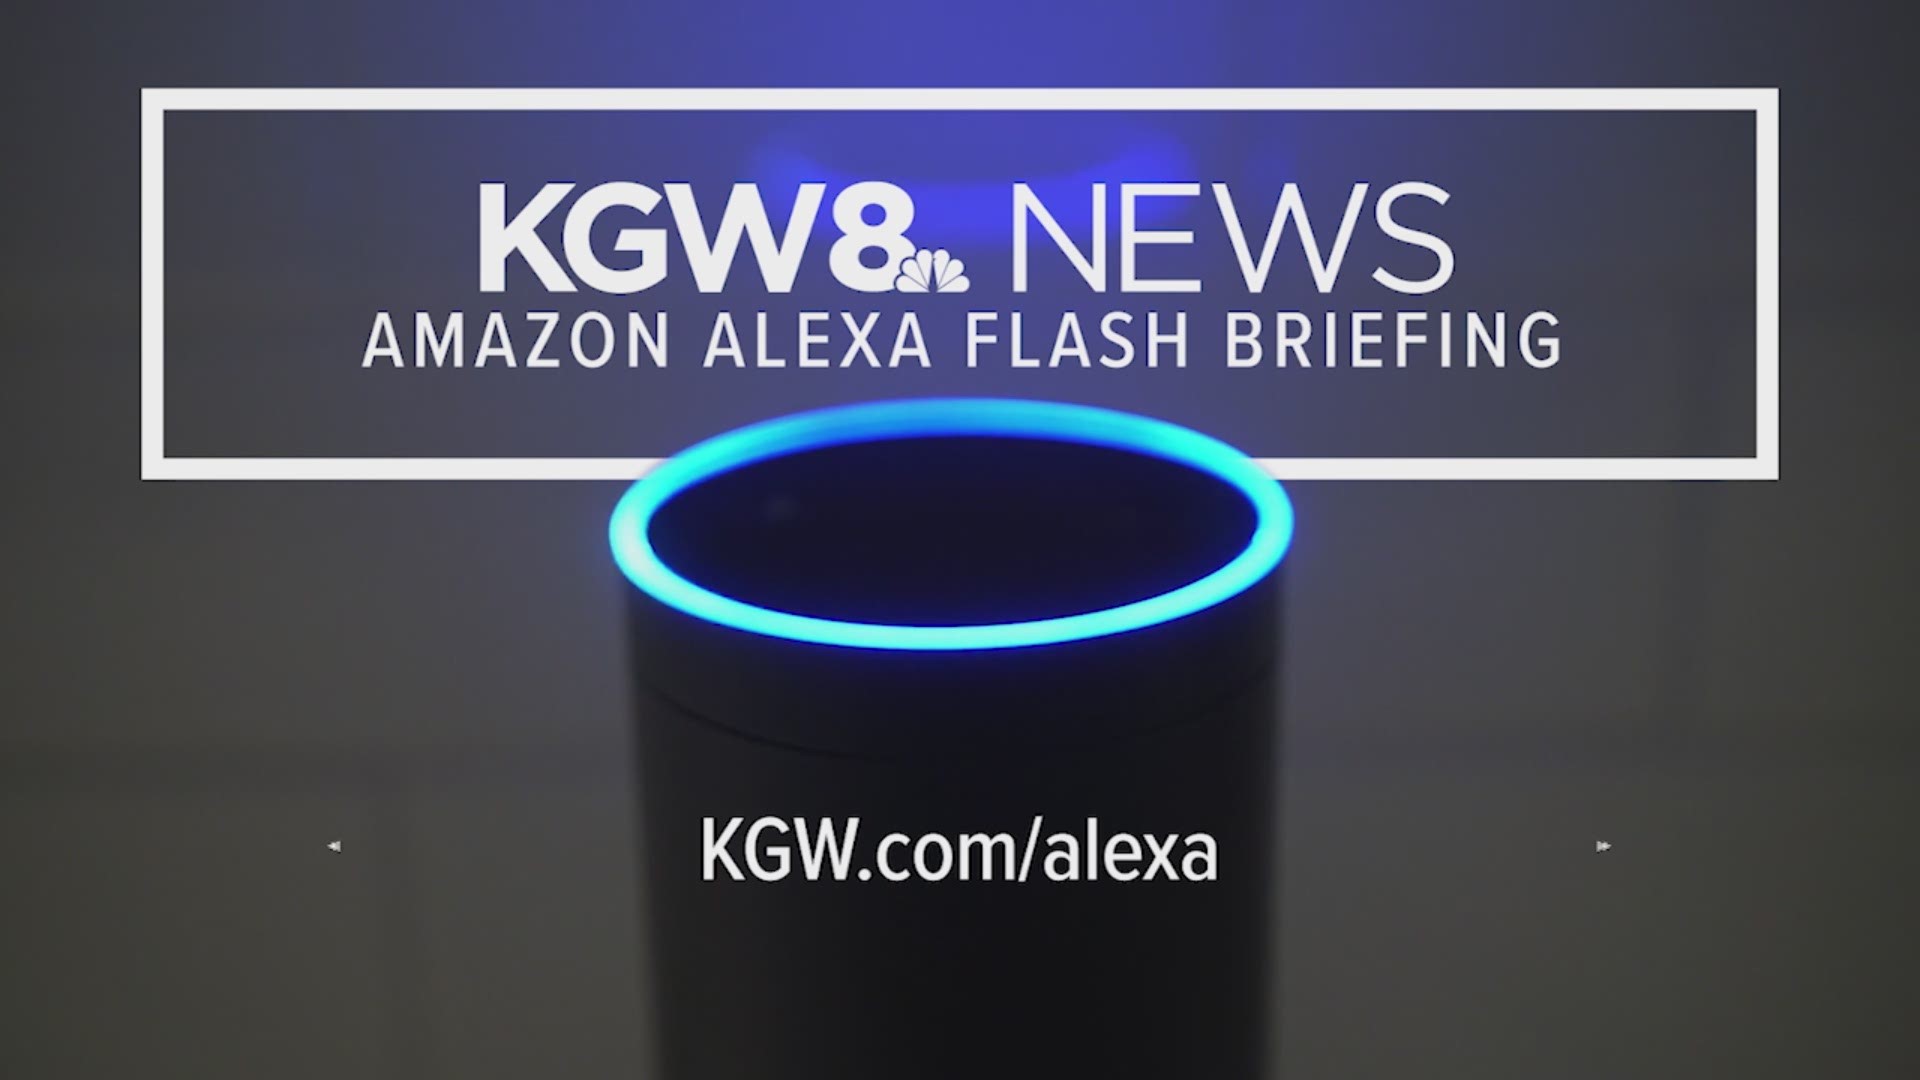 Once you've enabled KGW News as your flash briefing, just say: "Alexa, what's my flash briefing?" or "Alexa, what's in the news?" http://on.kgw.com/flash